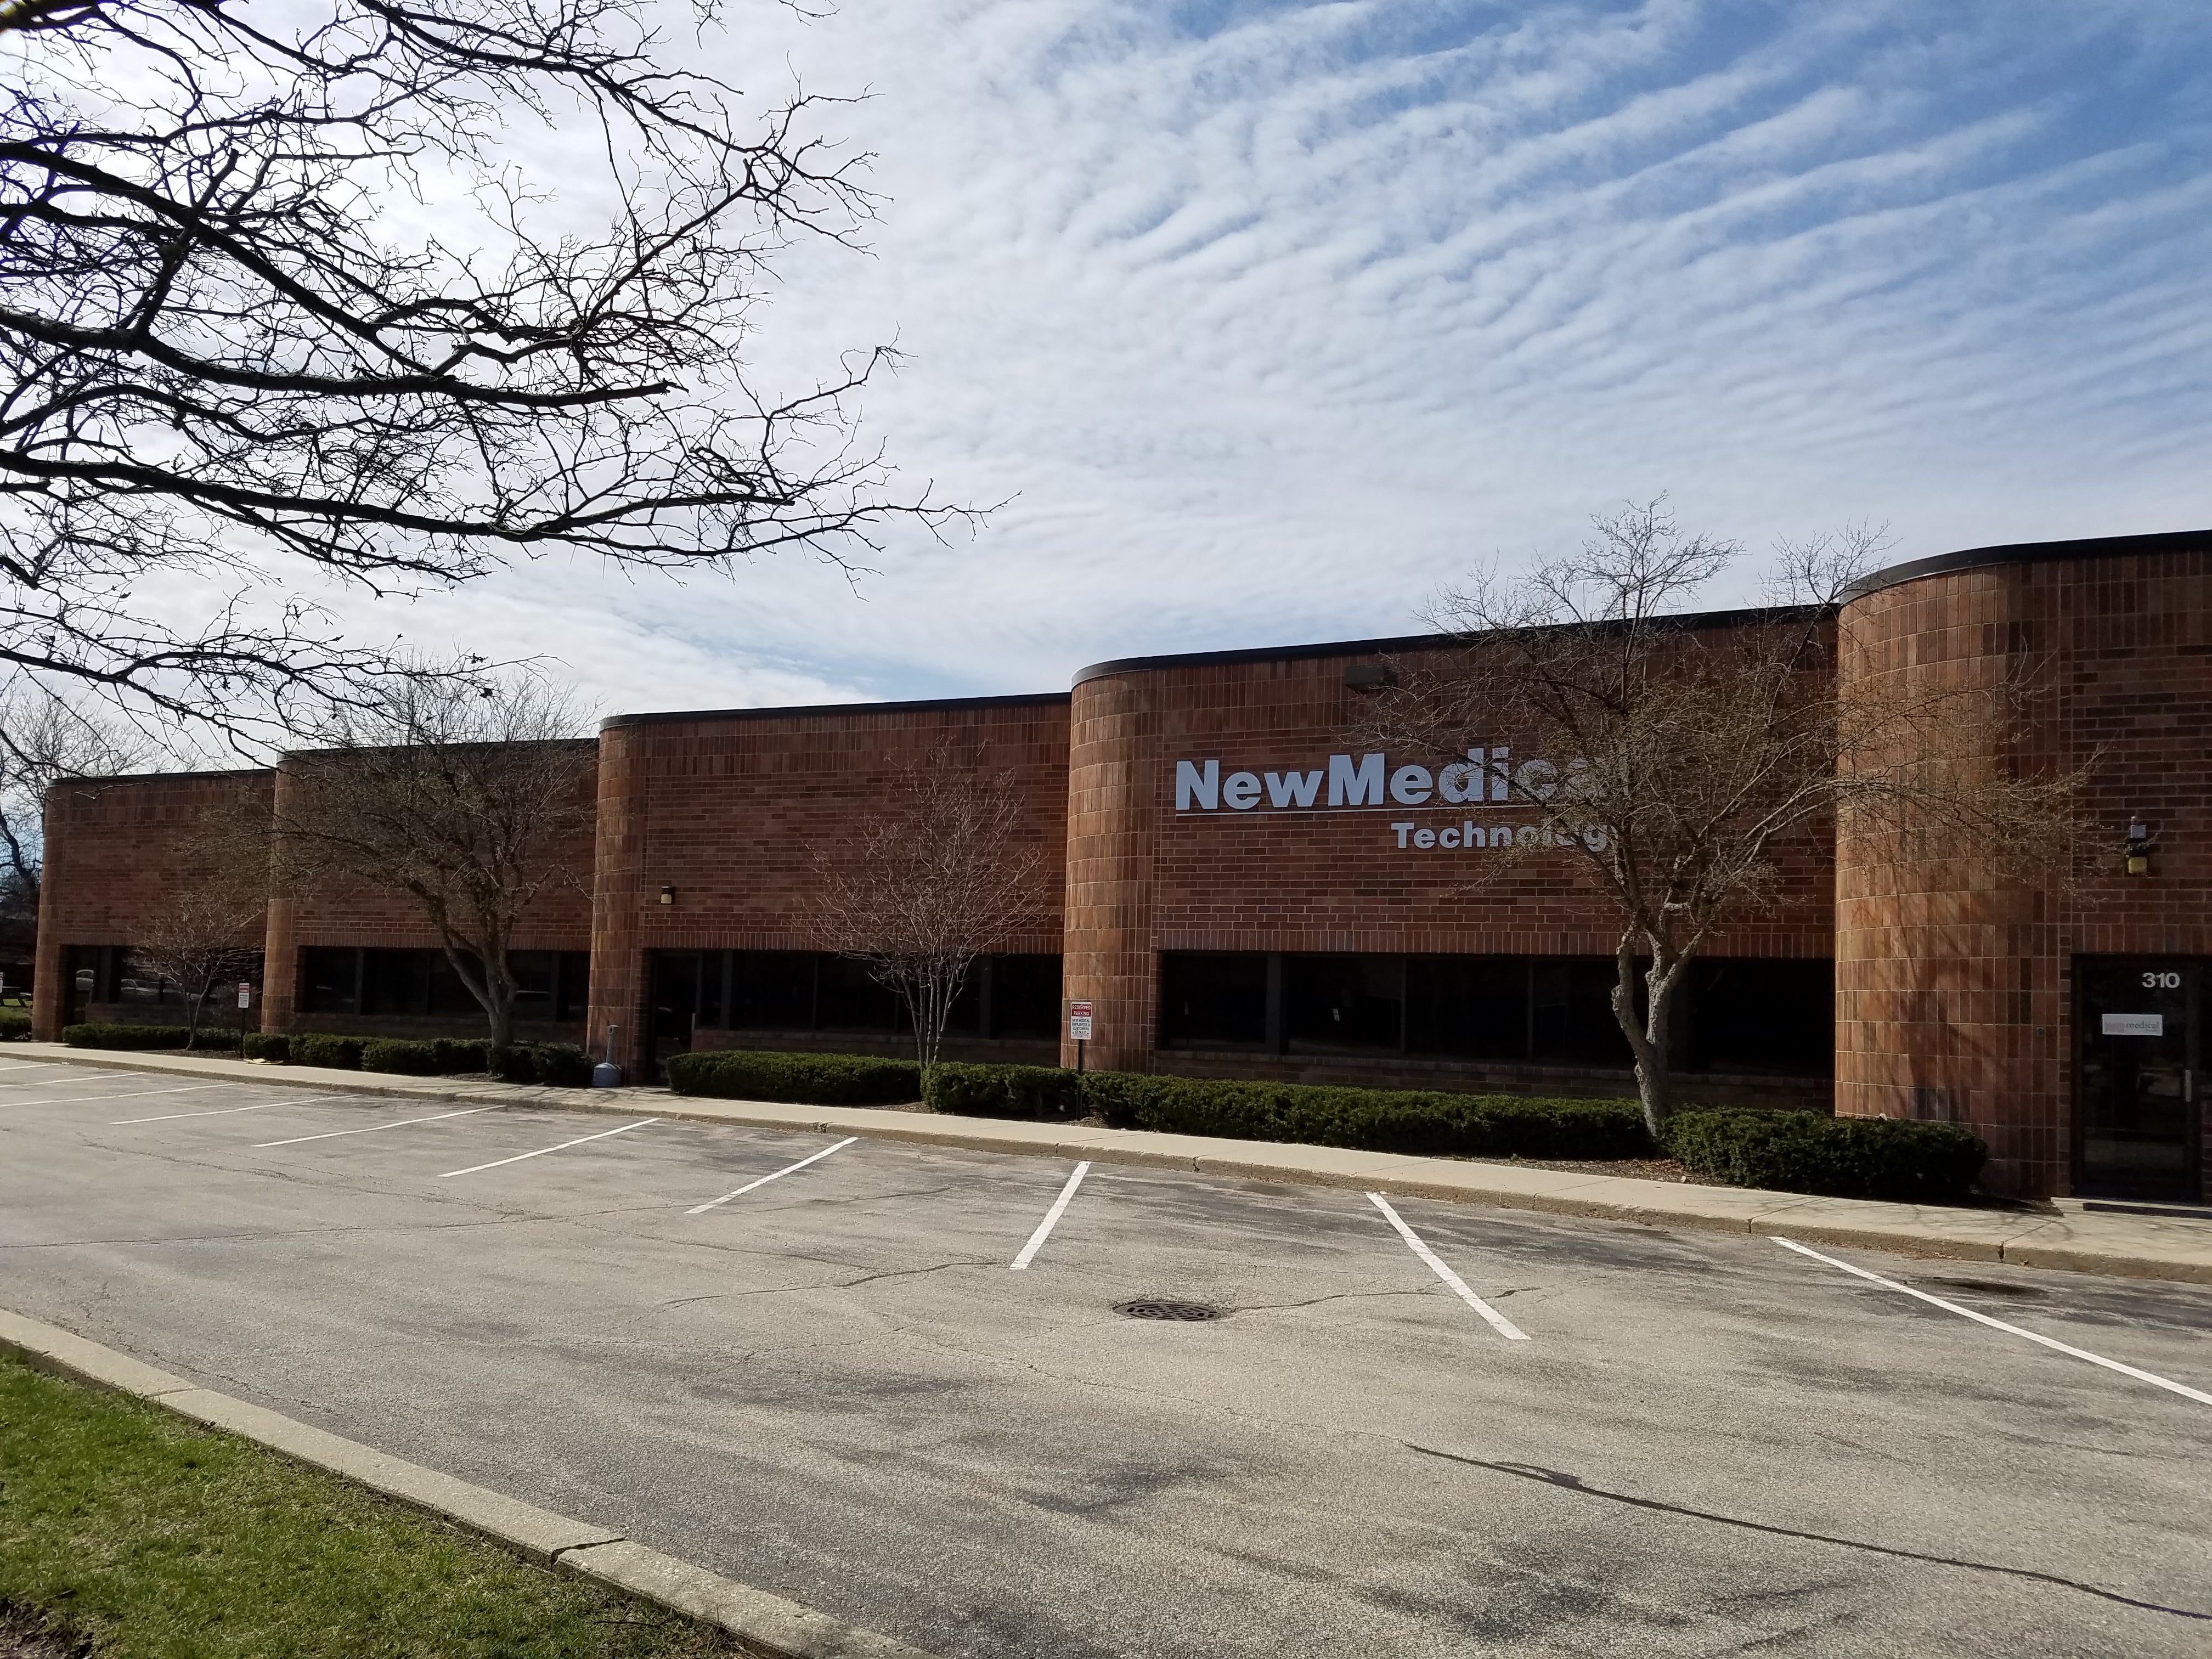 Newmedical Technology headquarters in Northbrook, Illinois